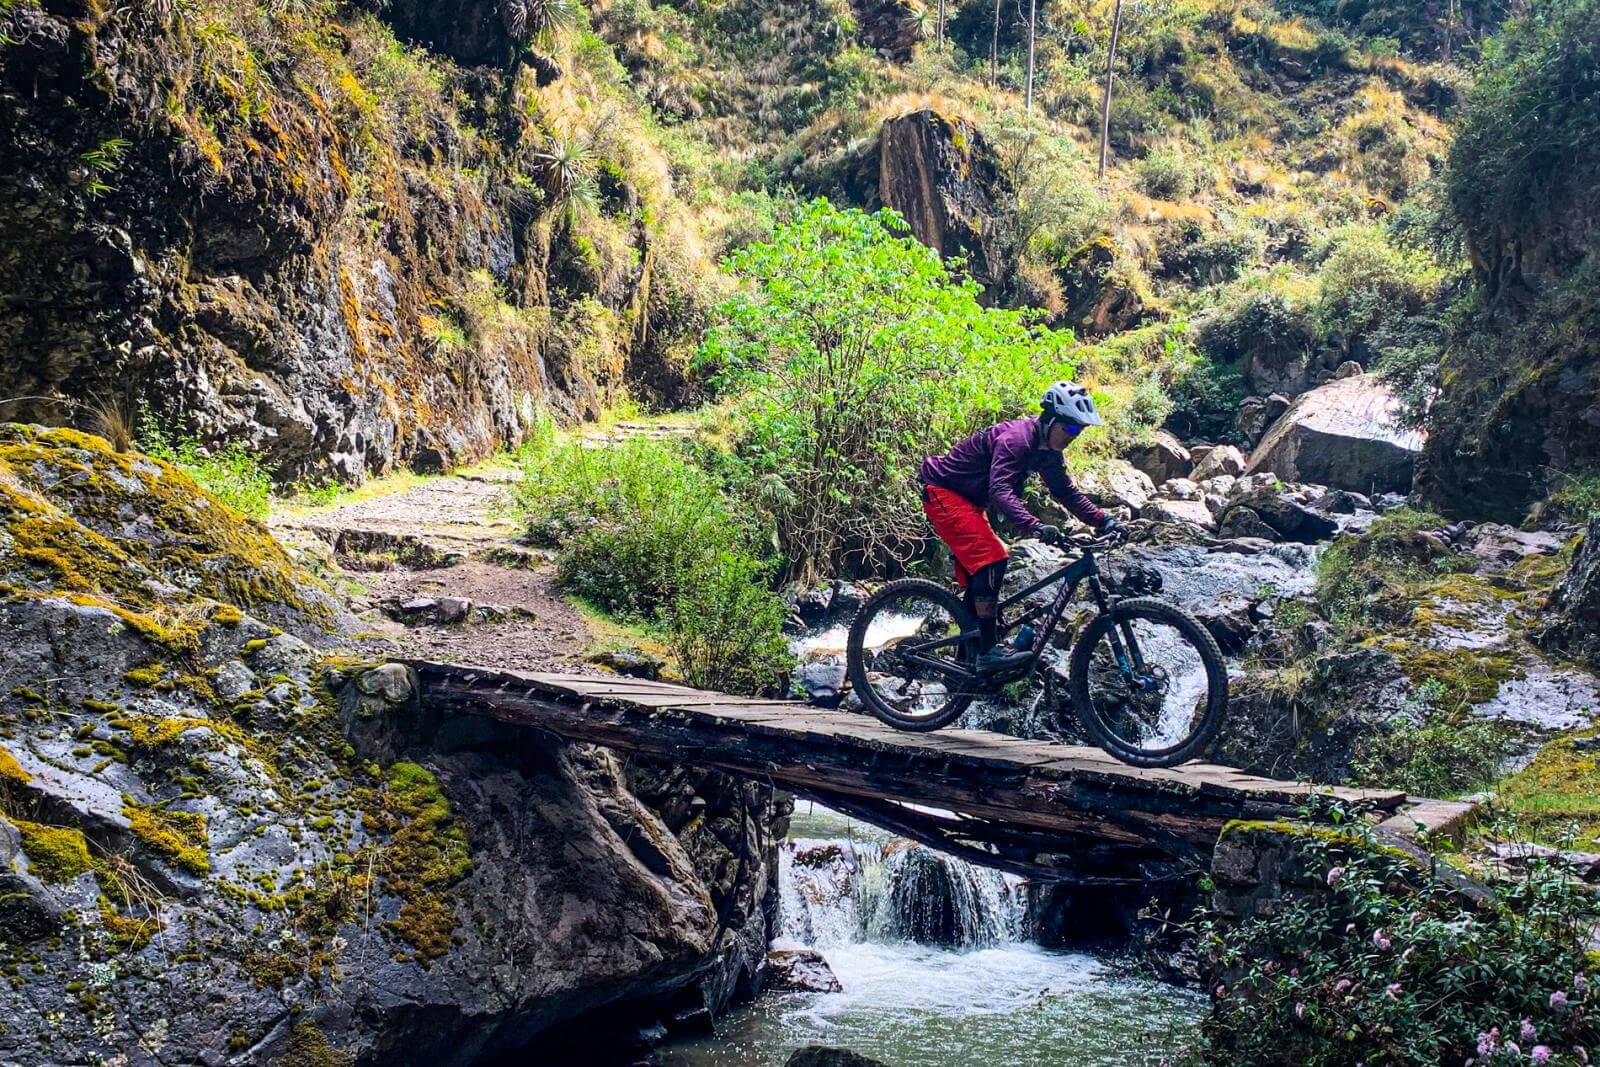 From mountain to mountain, biking the trails through the Sacred Valley in Peru.